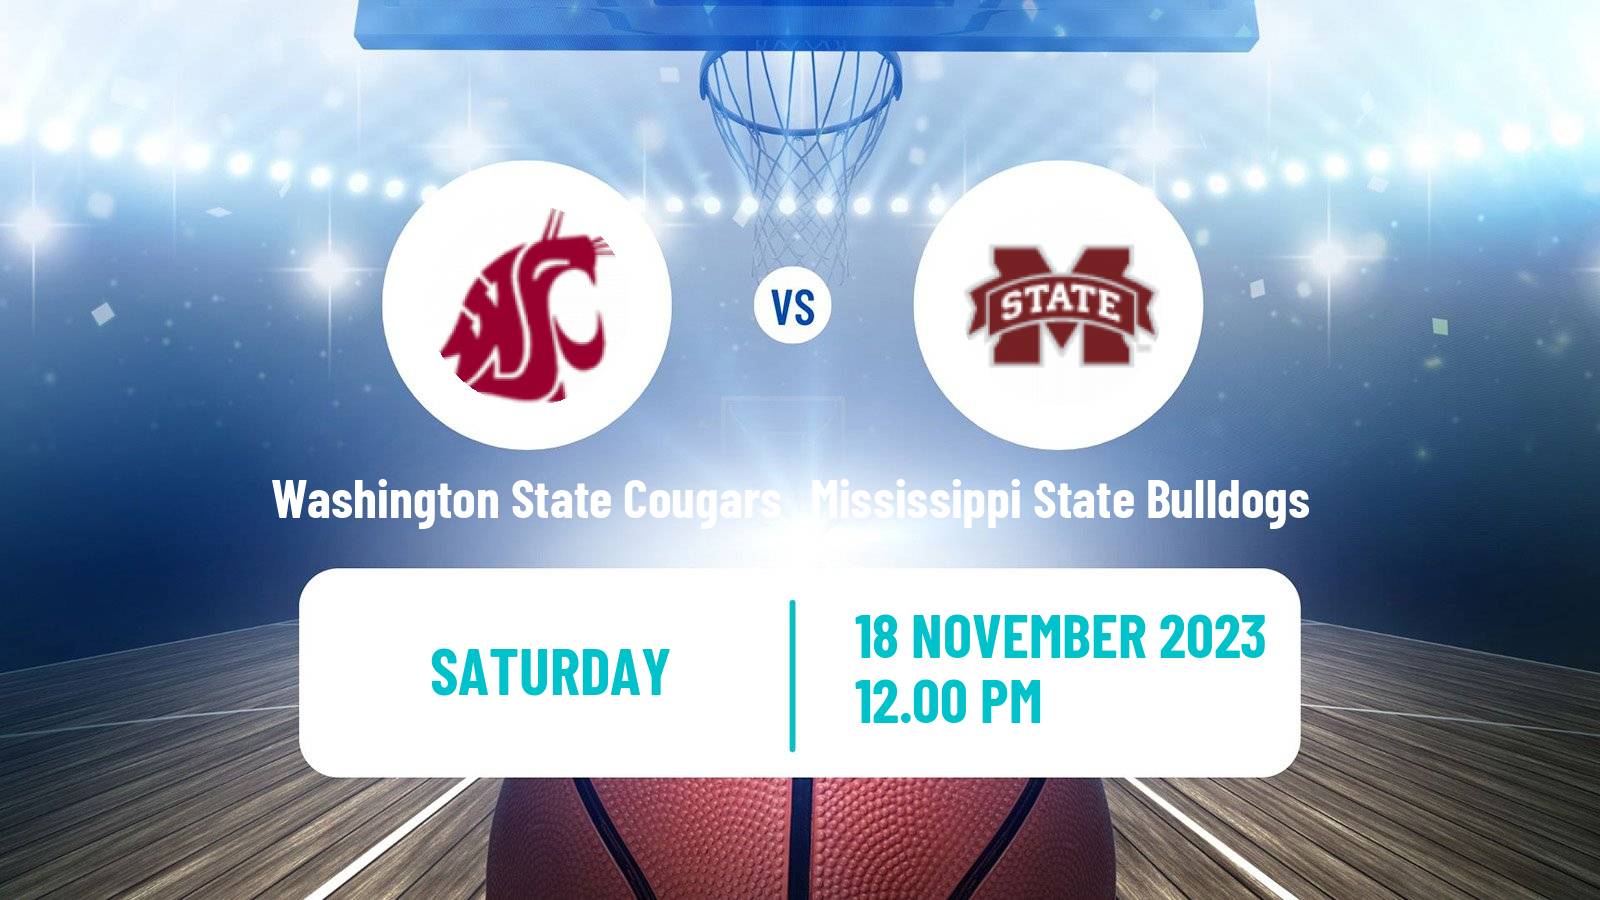 Basketball NCAA College Basketball Washington State Cougars - Mississippi State Bulldogs